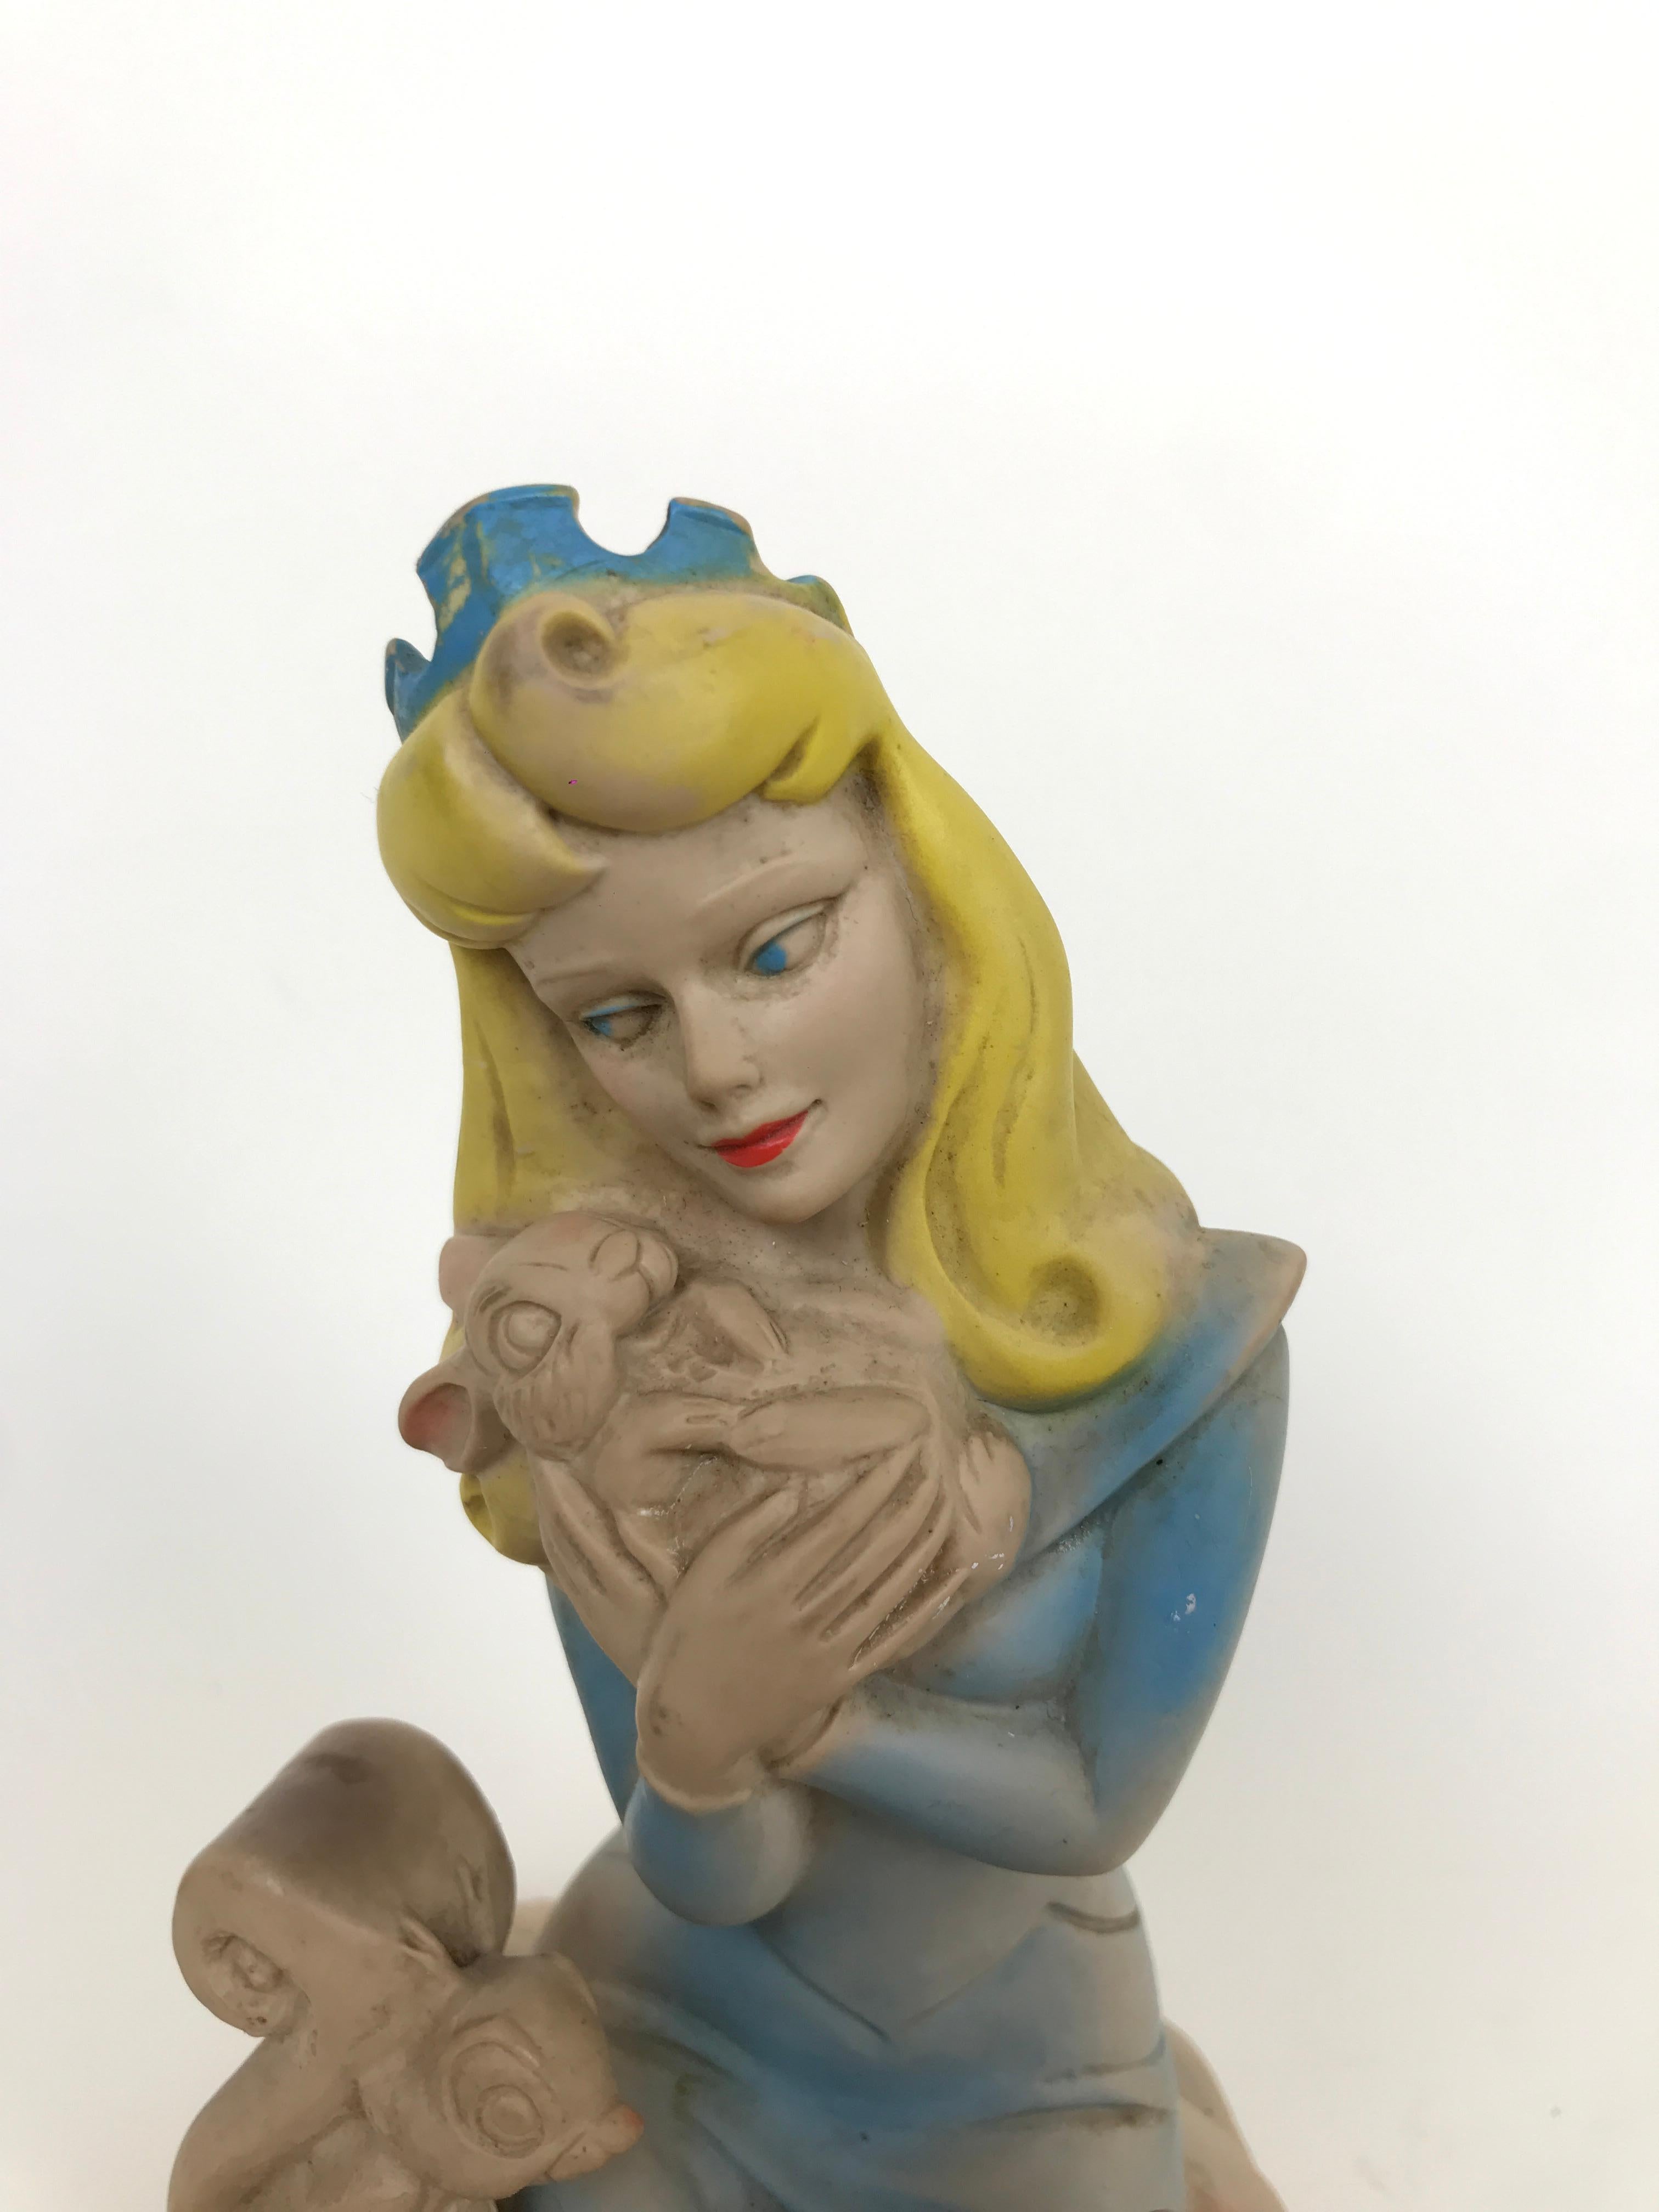 English 1960s Vintage Original Disney Sleeping Beauty Rubber Squeak Toy Made in England For Sale